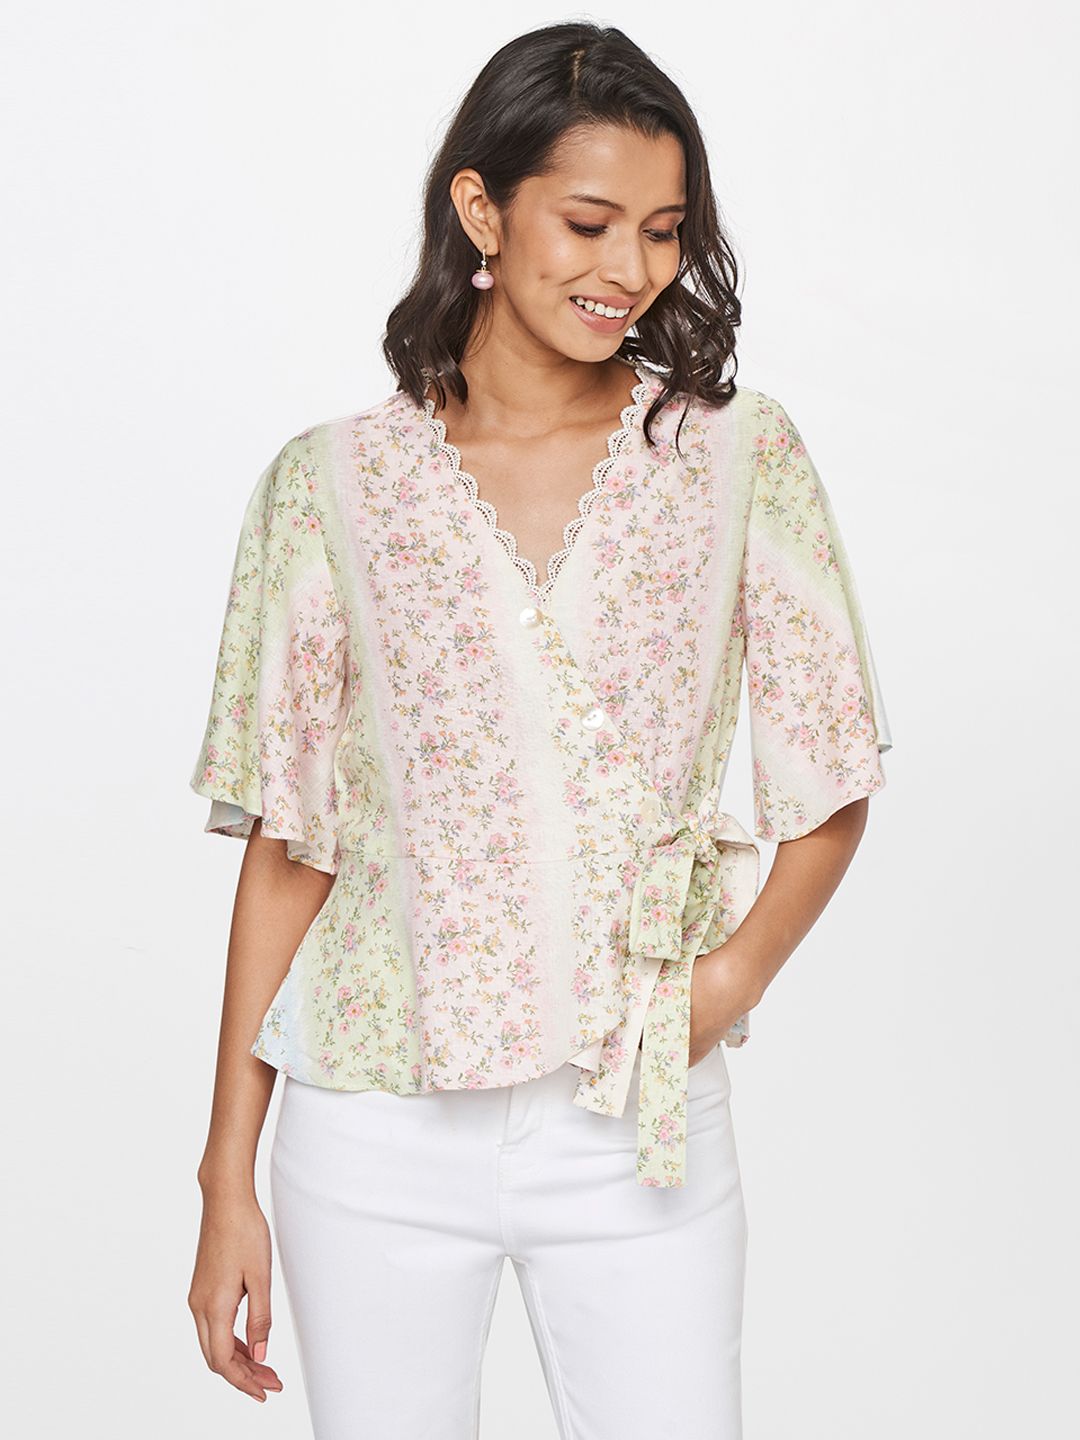 AND Floral Print Wrap Top Price in India